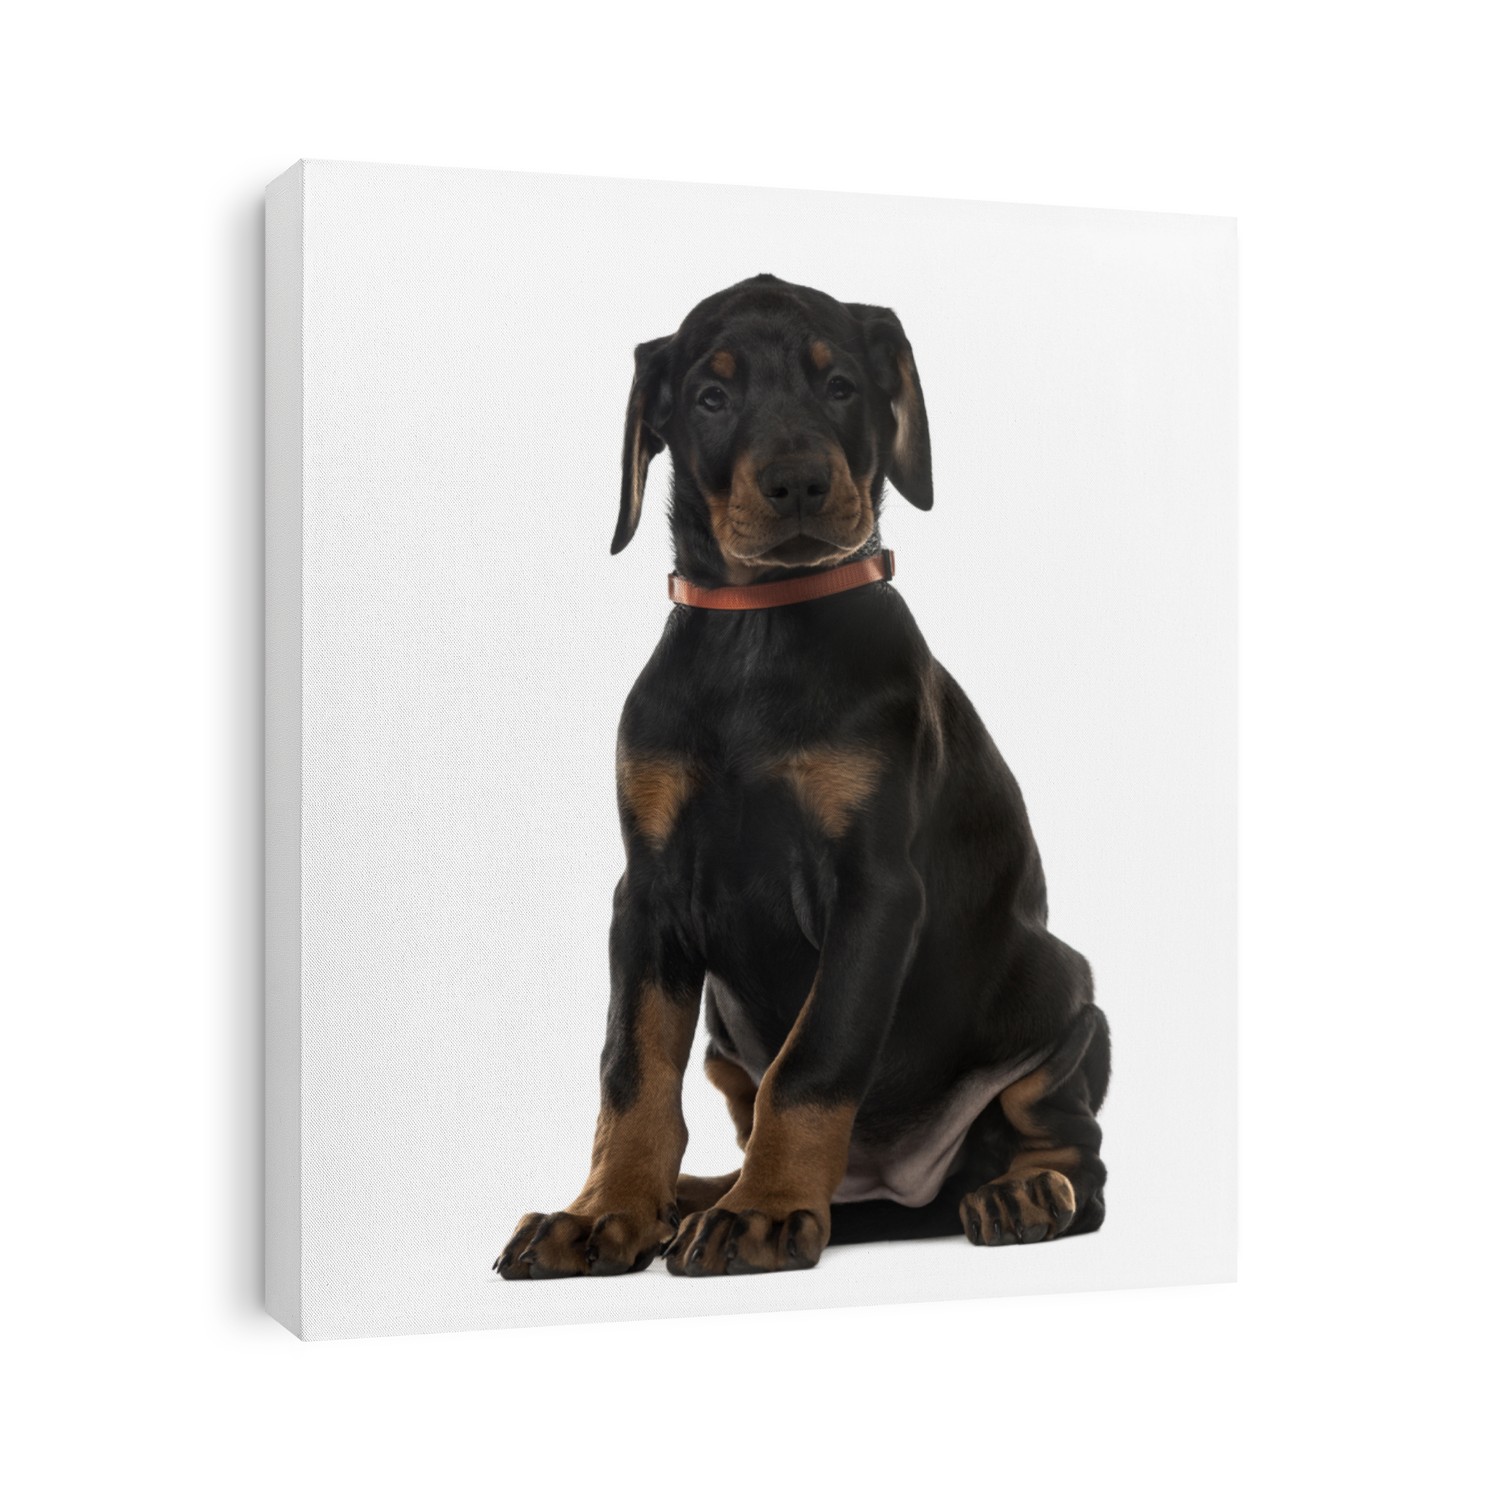 Puppy chocolate Doberman Pinscher sitting,(7 weeks old, isolated on white